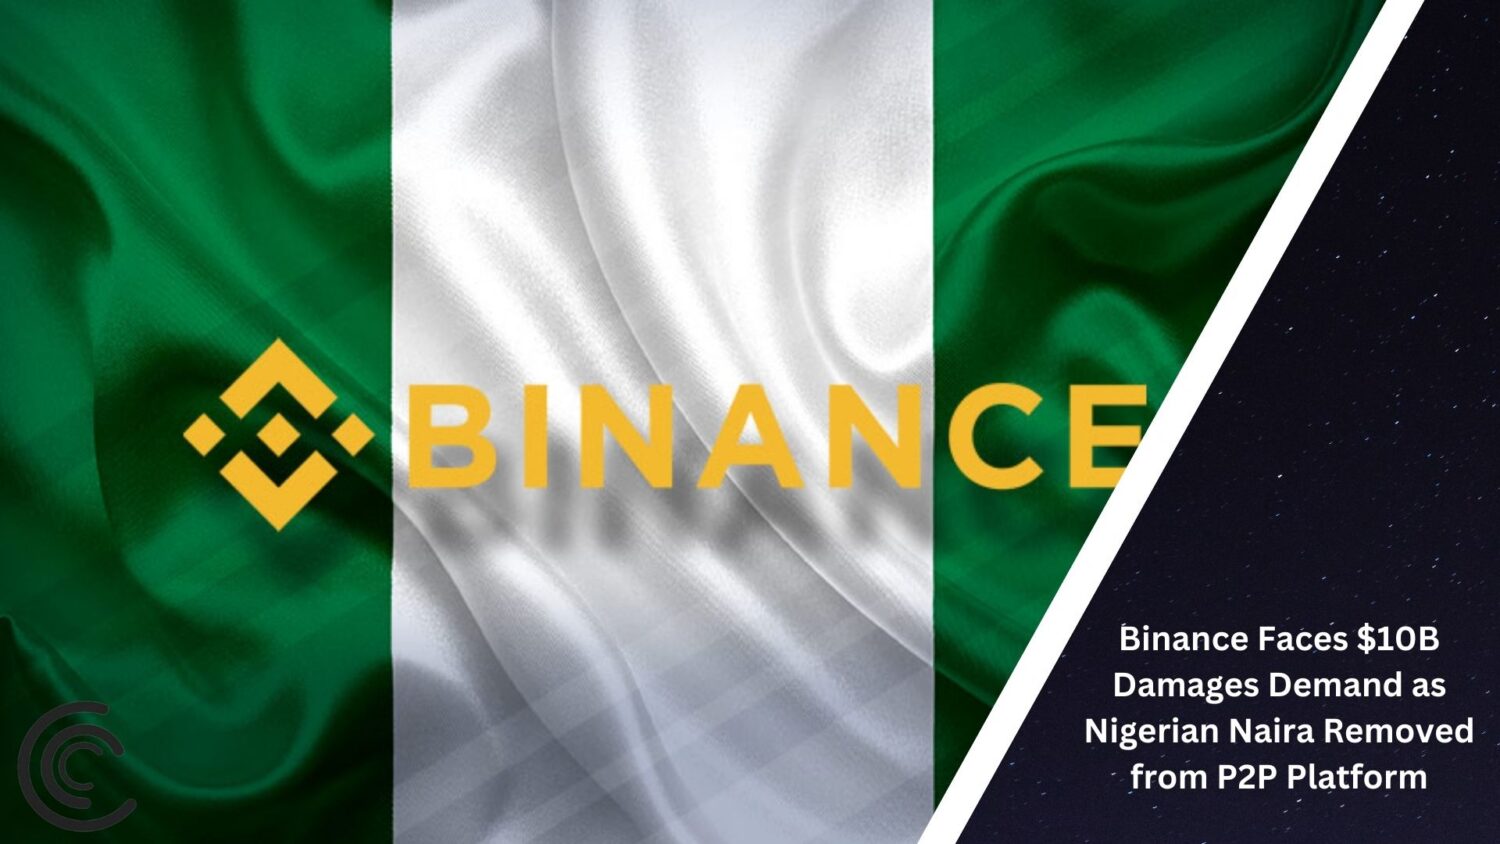 Binance Faces $10B Damages Demand As Nigerian Naira Removed From P2P Platform